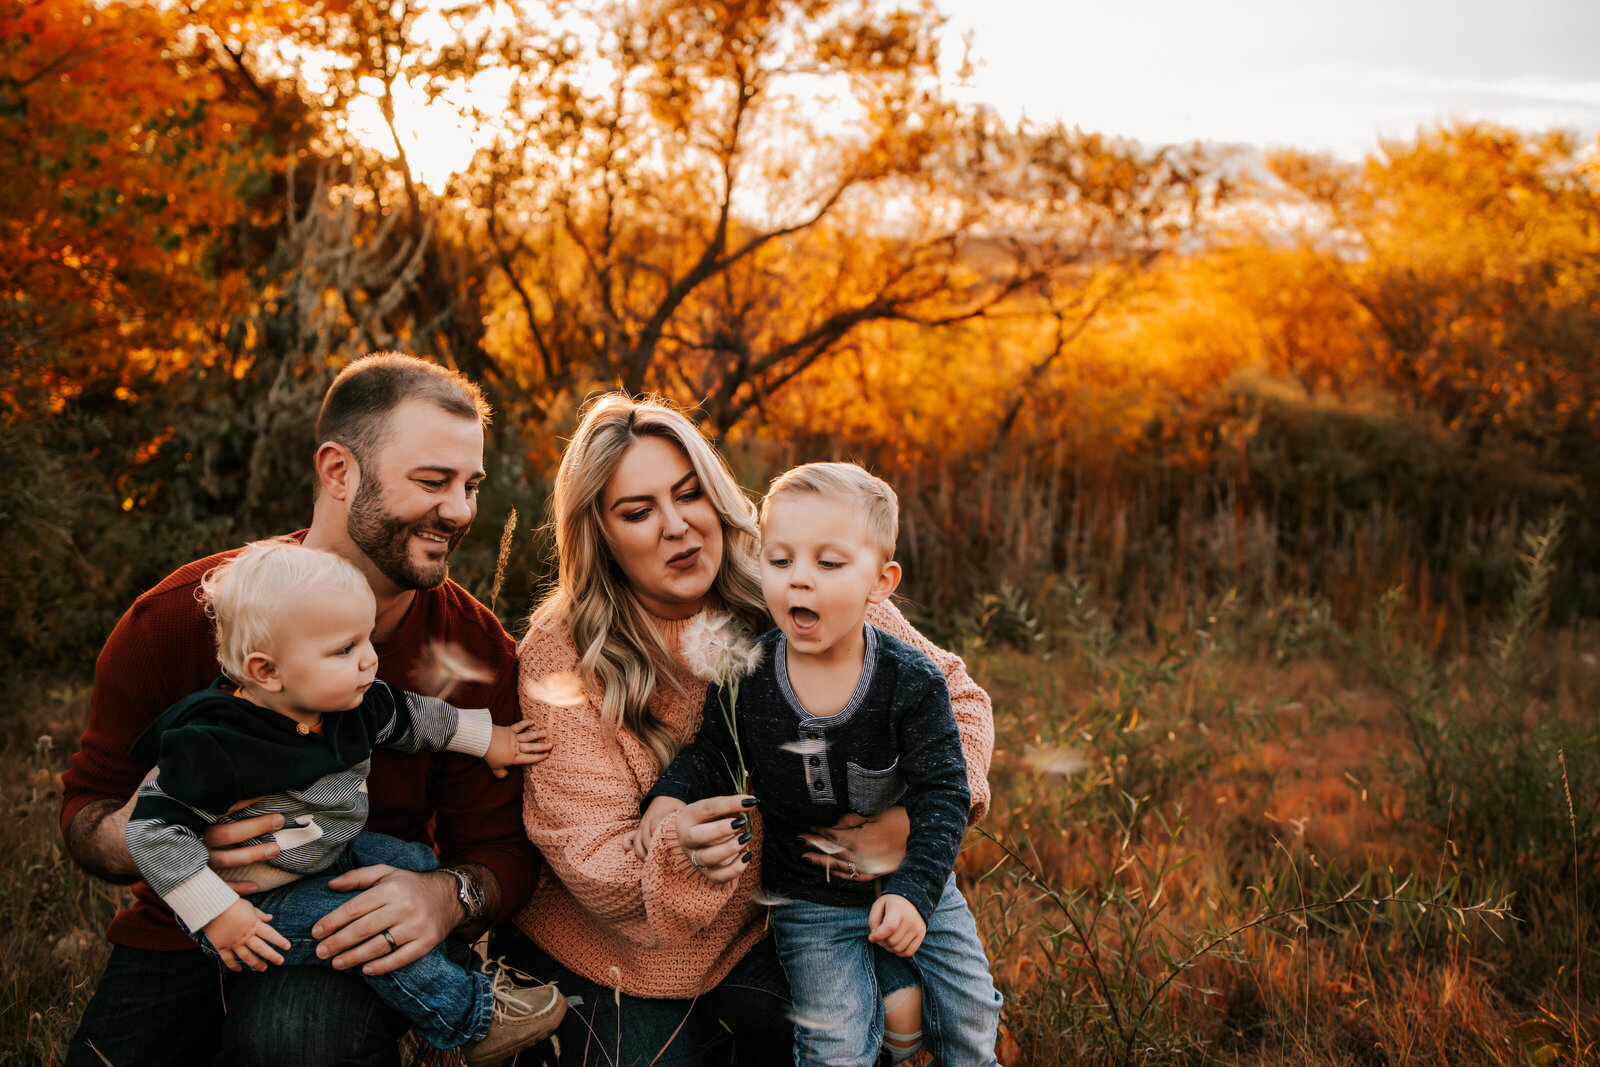 mom and dad with two young toddler boys blowing a flower during golden hour photos